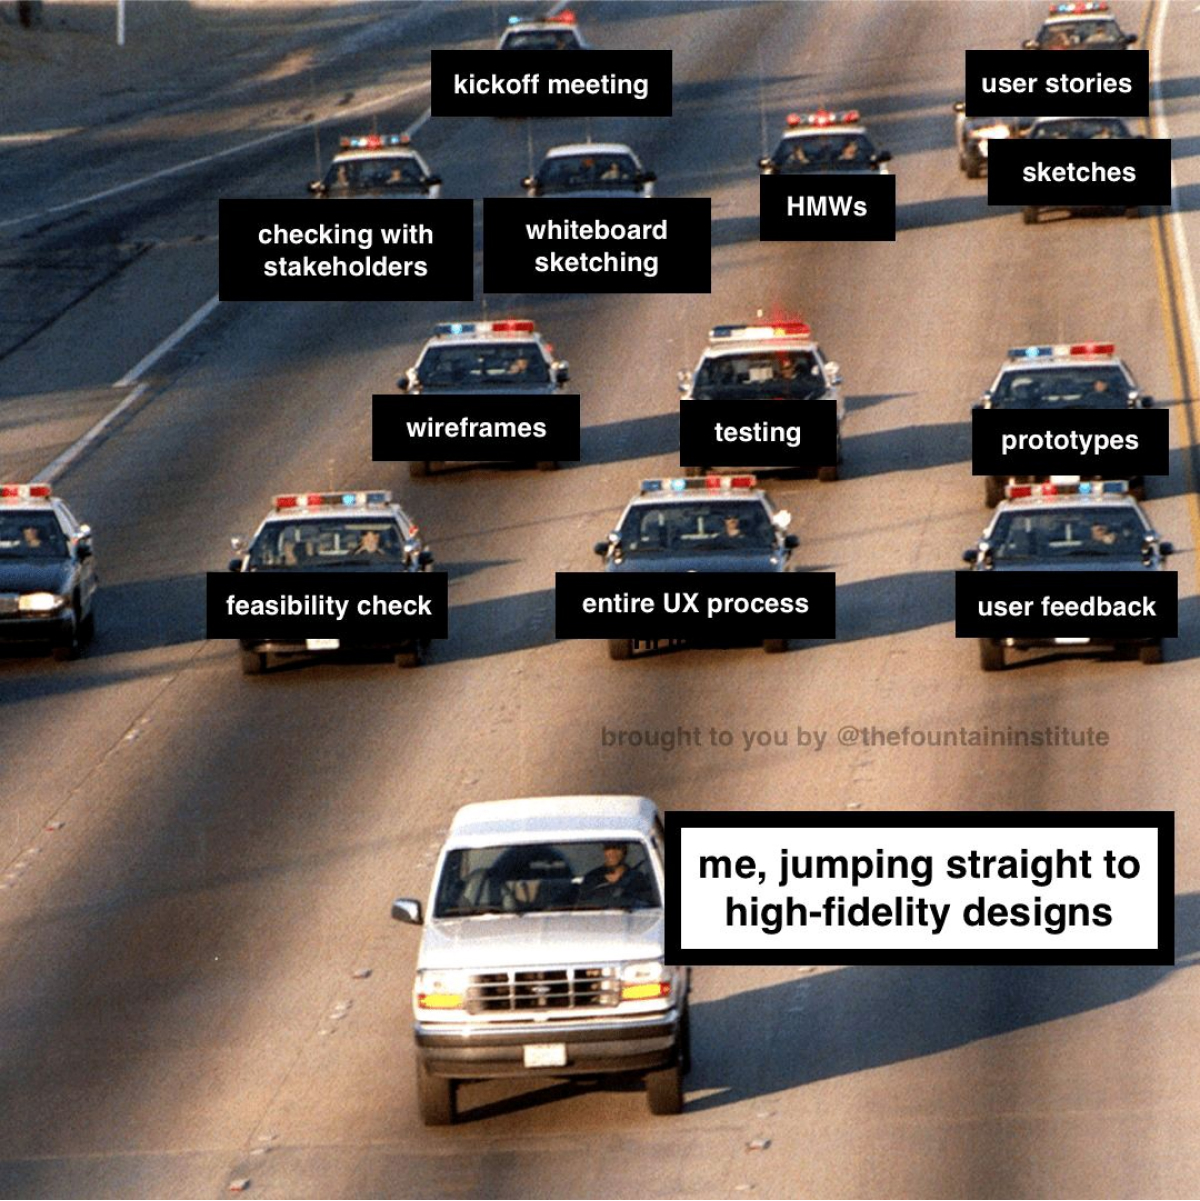 A bunch of police cars labeled with UX and disovery terms chasing a white SUV labeled 'Me, jumping straight into hi-fidelity designs'.